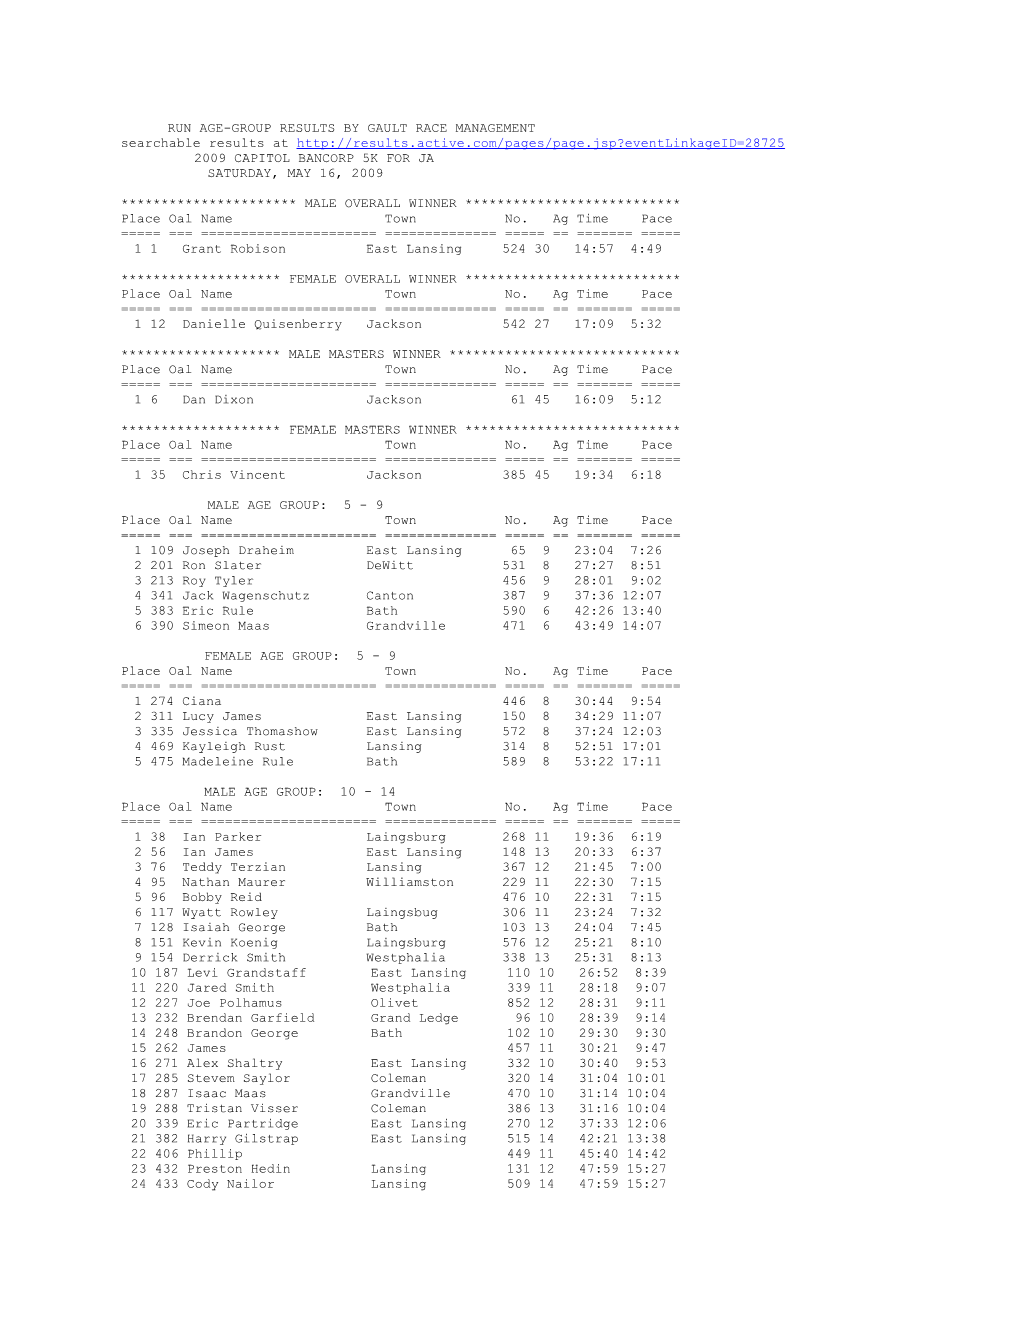 Run Age-Group Results by Gault Race Management